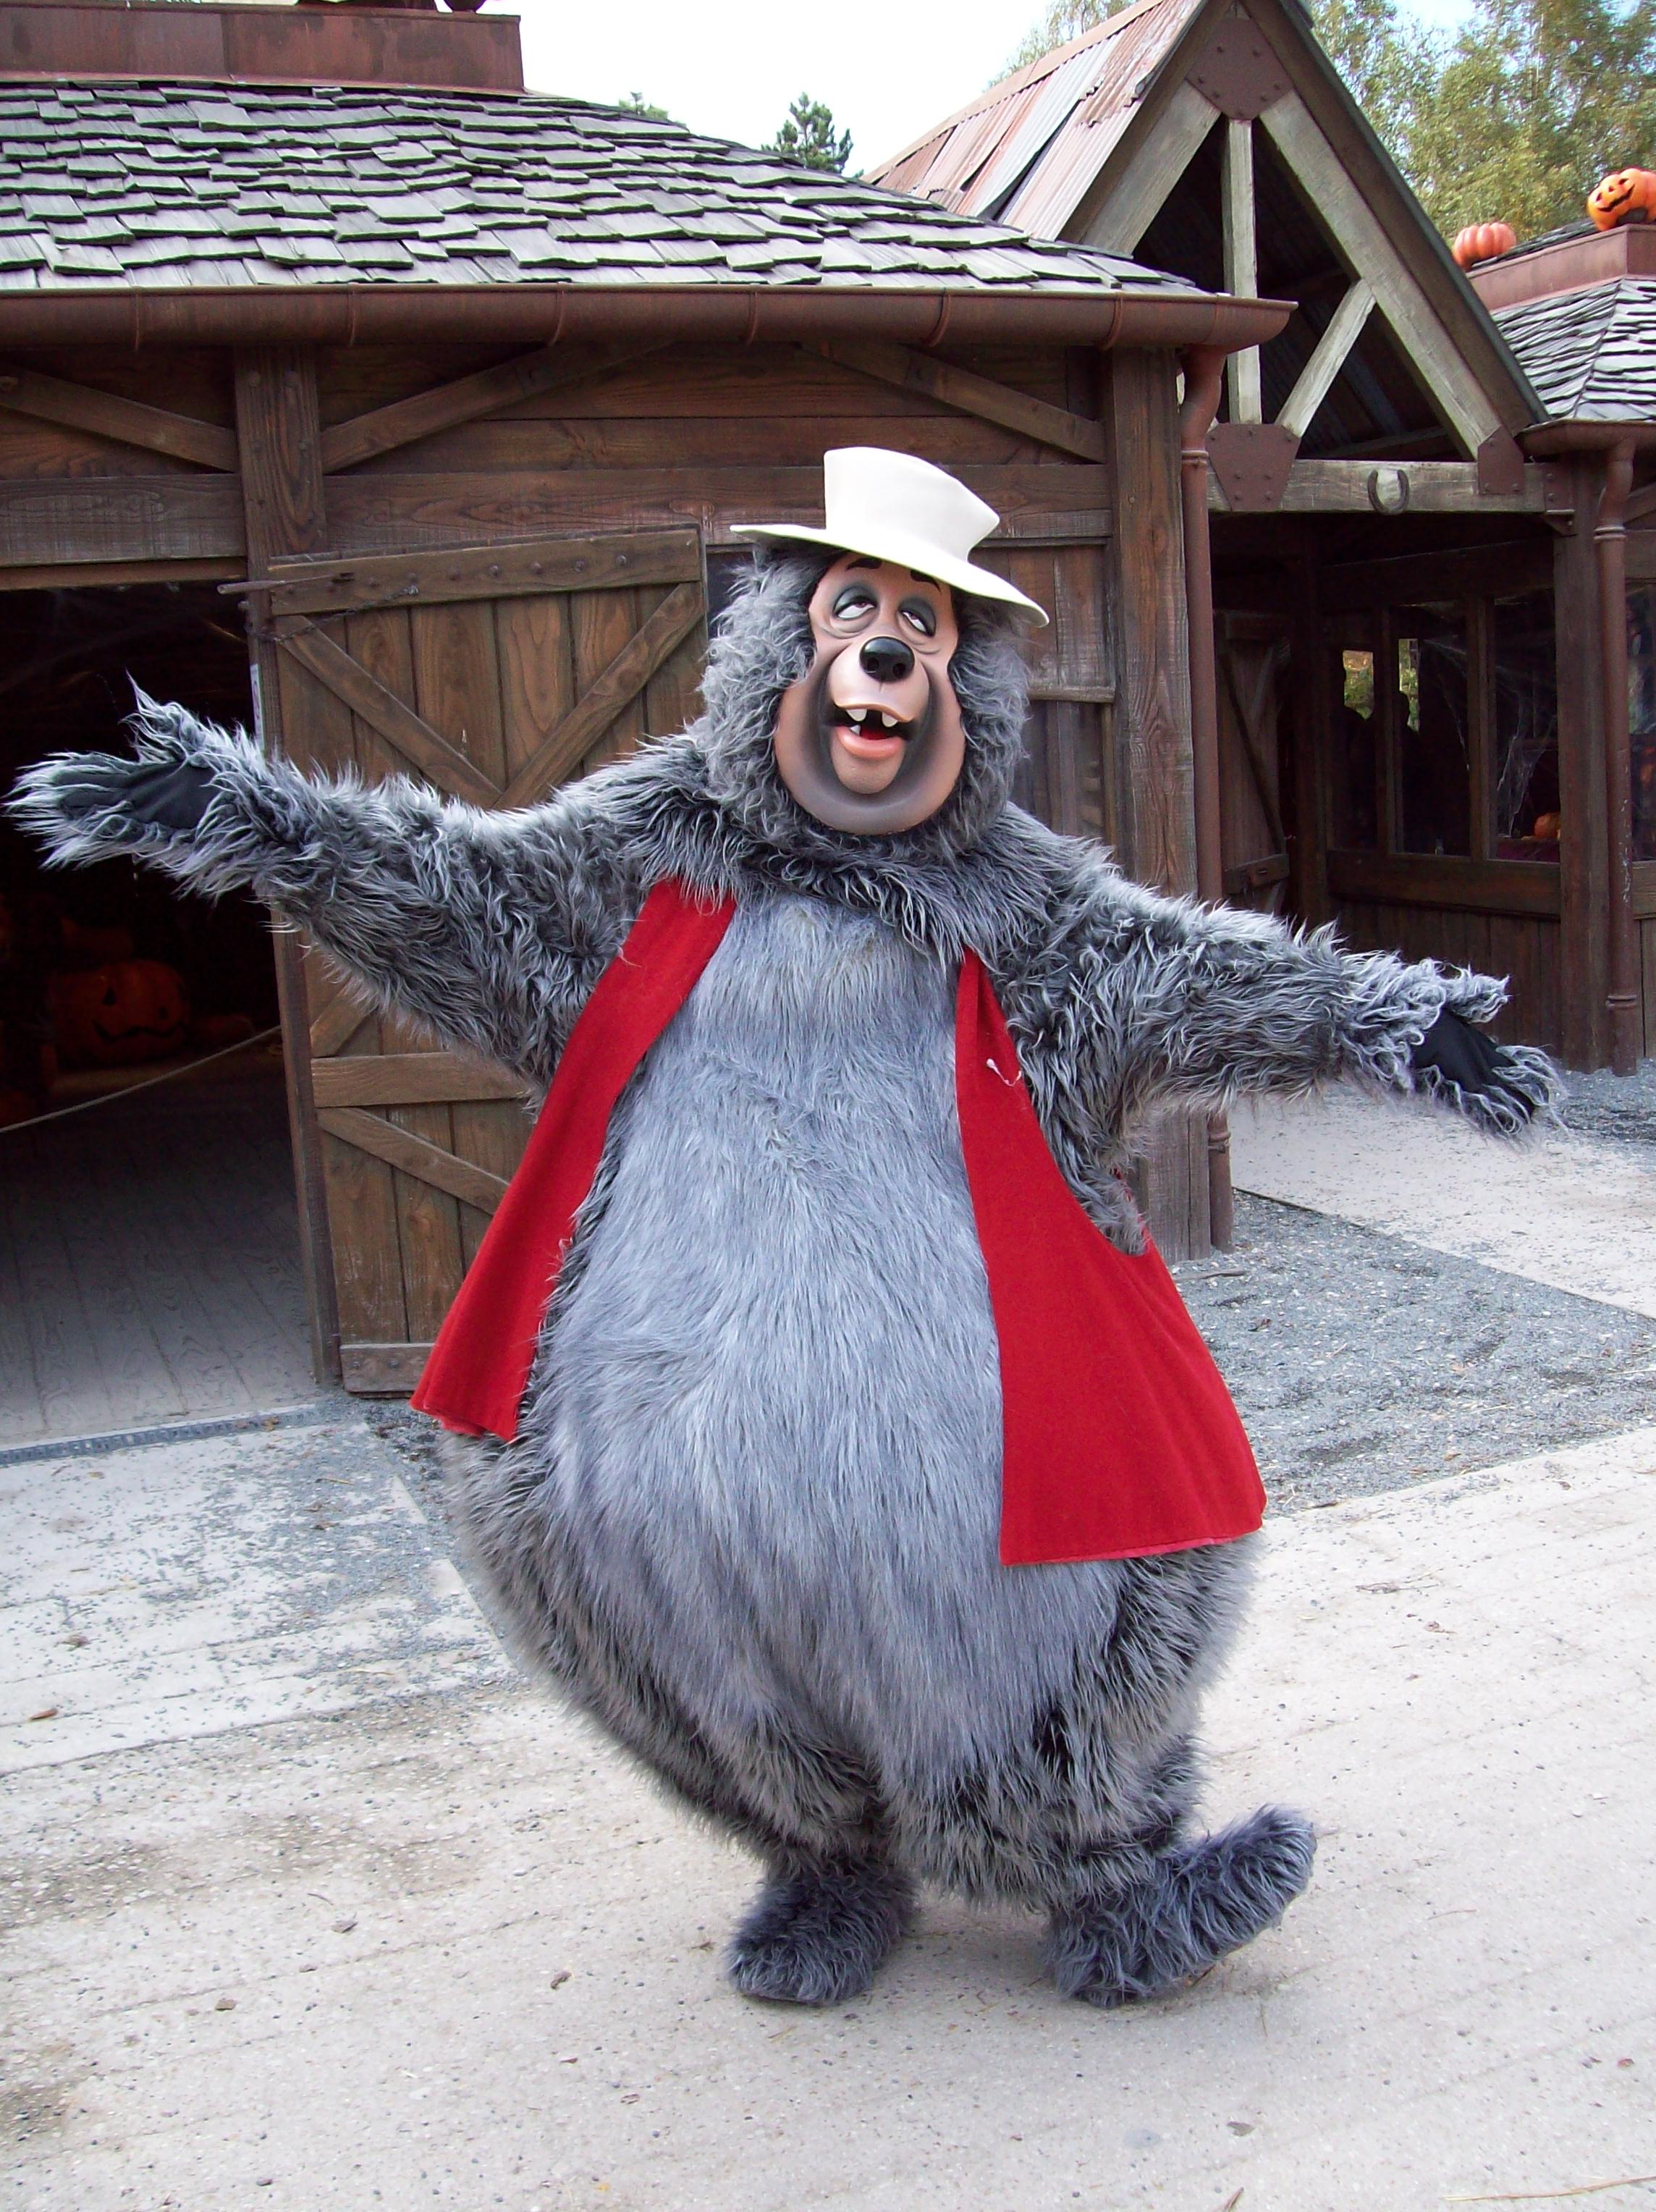 Big Al used to do Meet'n'Greets all the time, but nowadays it can be quite hard to find him at the Parks.